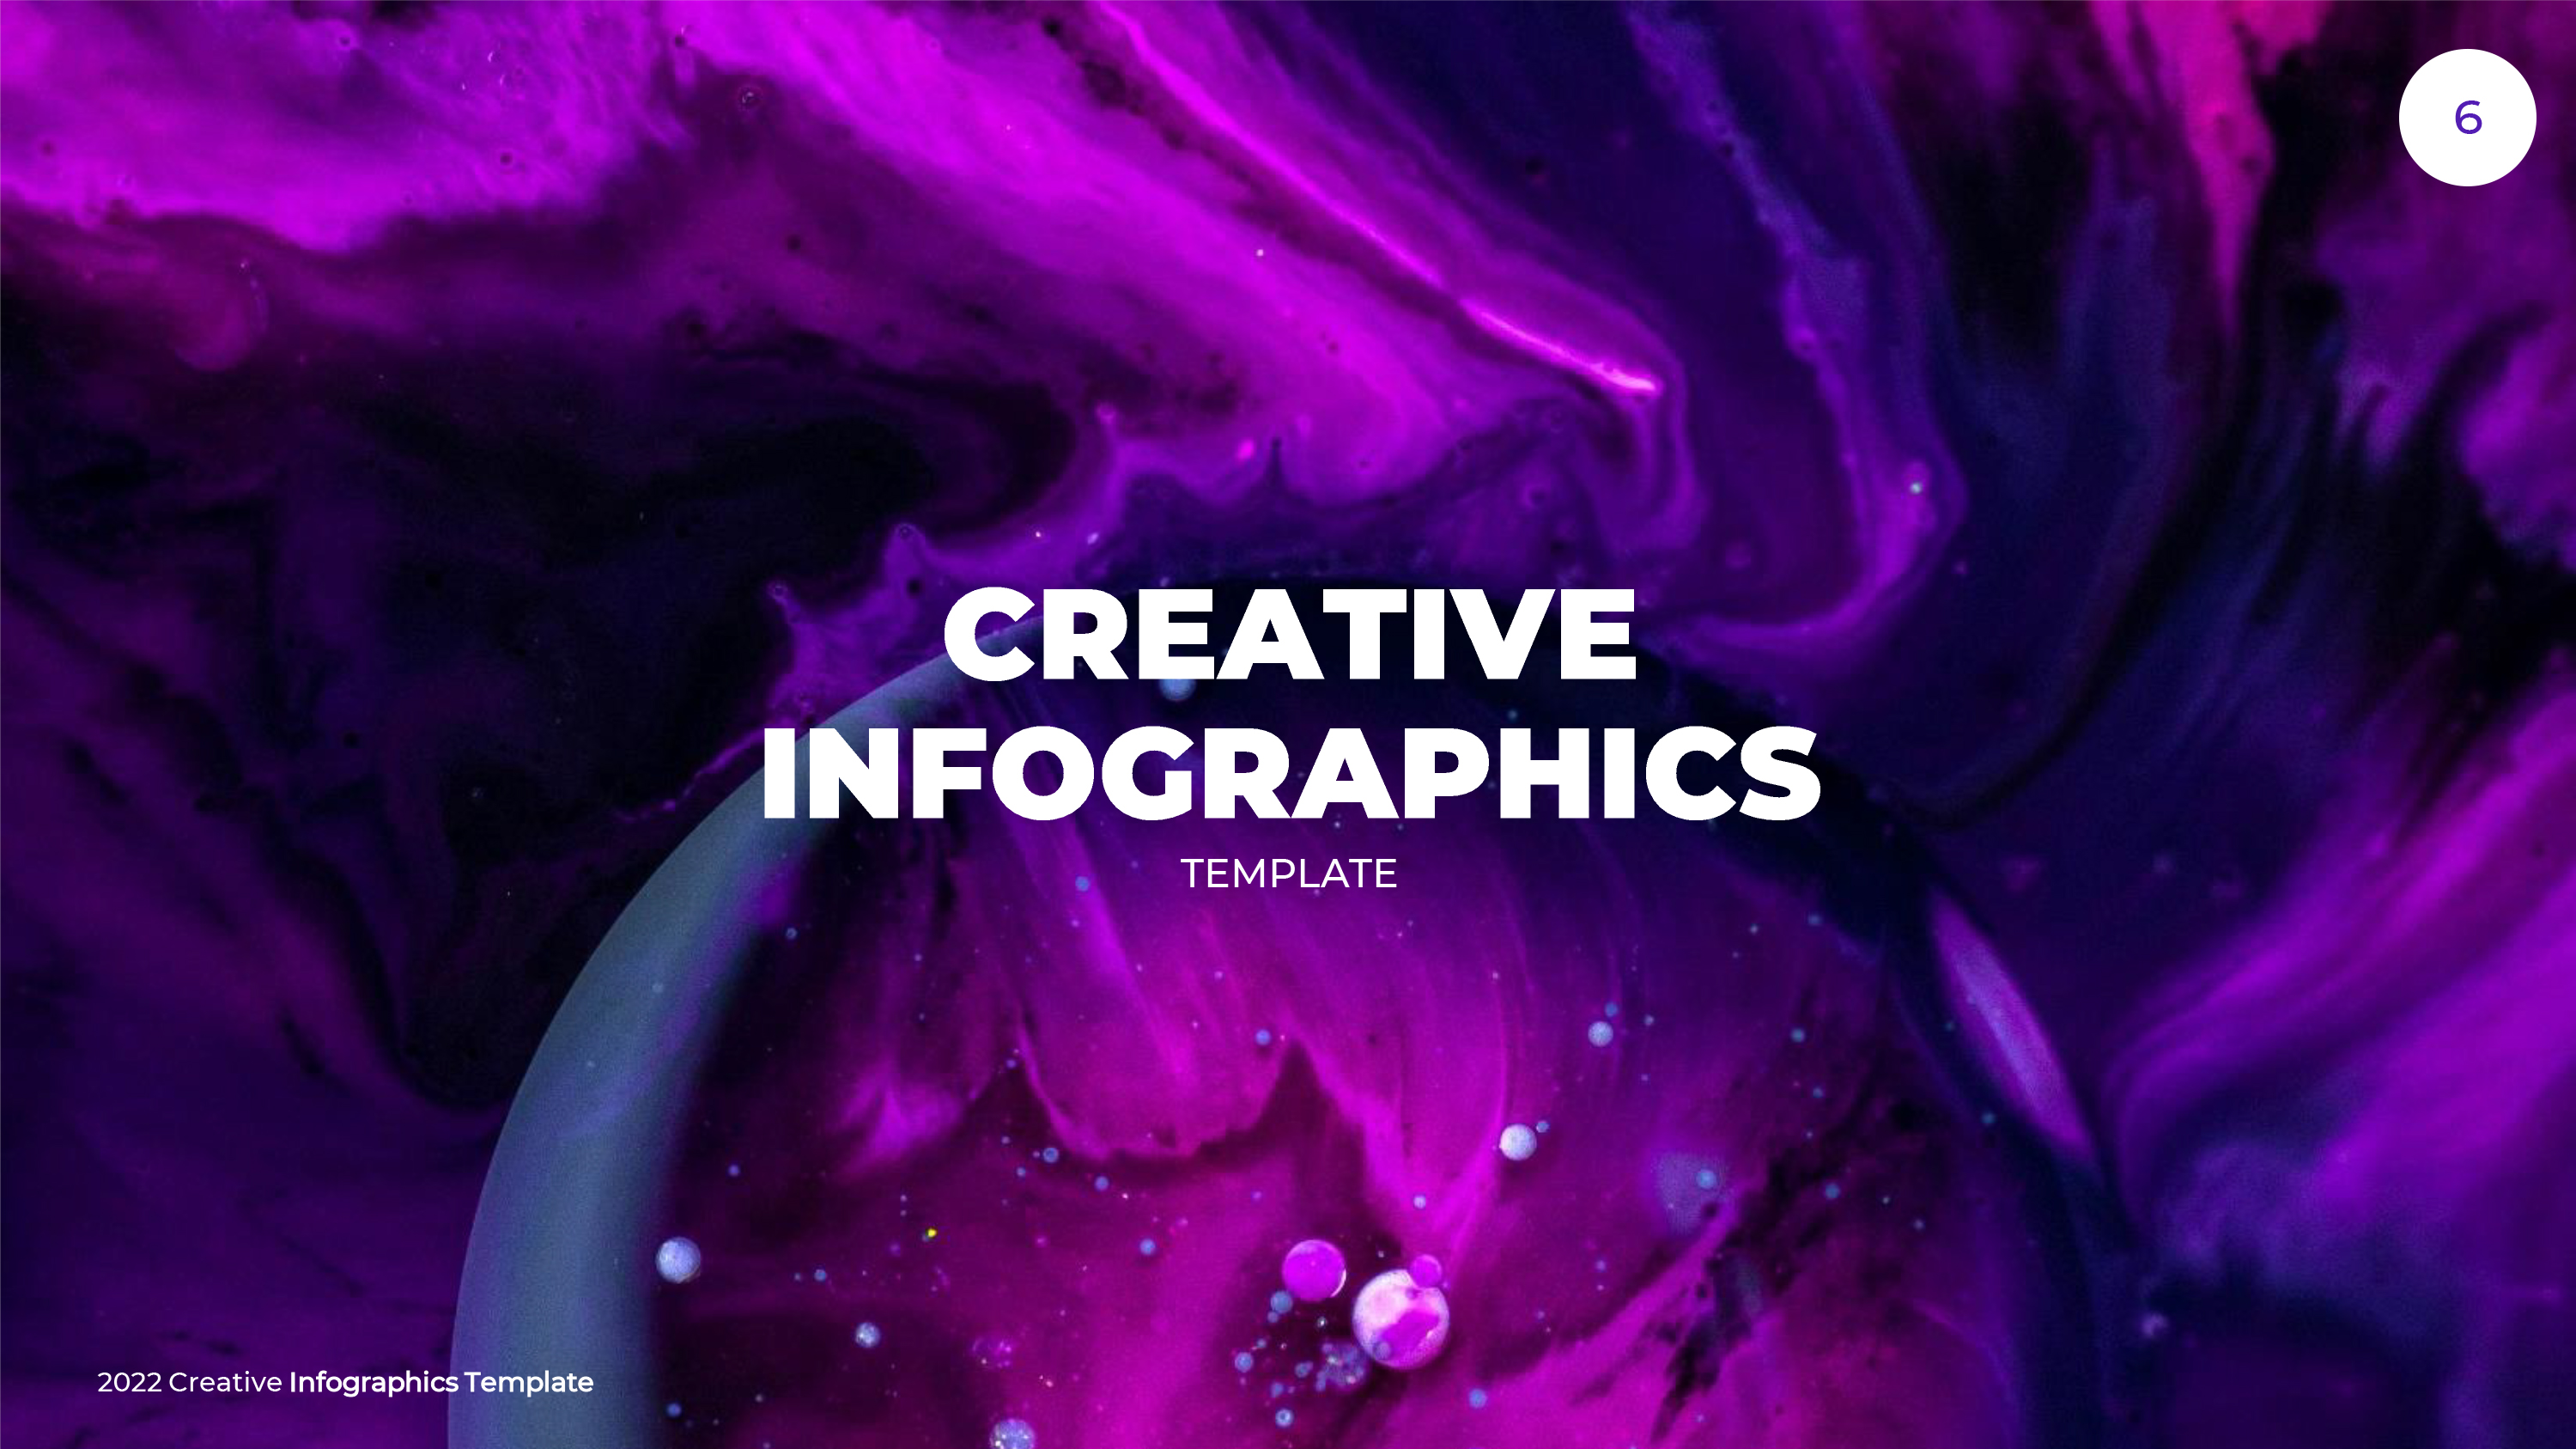 Creative Infographic PowerPoint Templates - 1